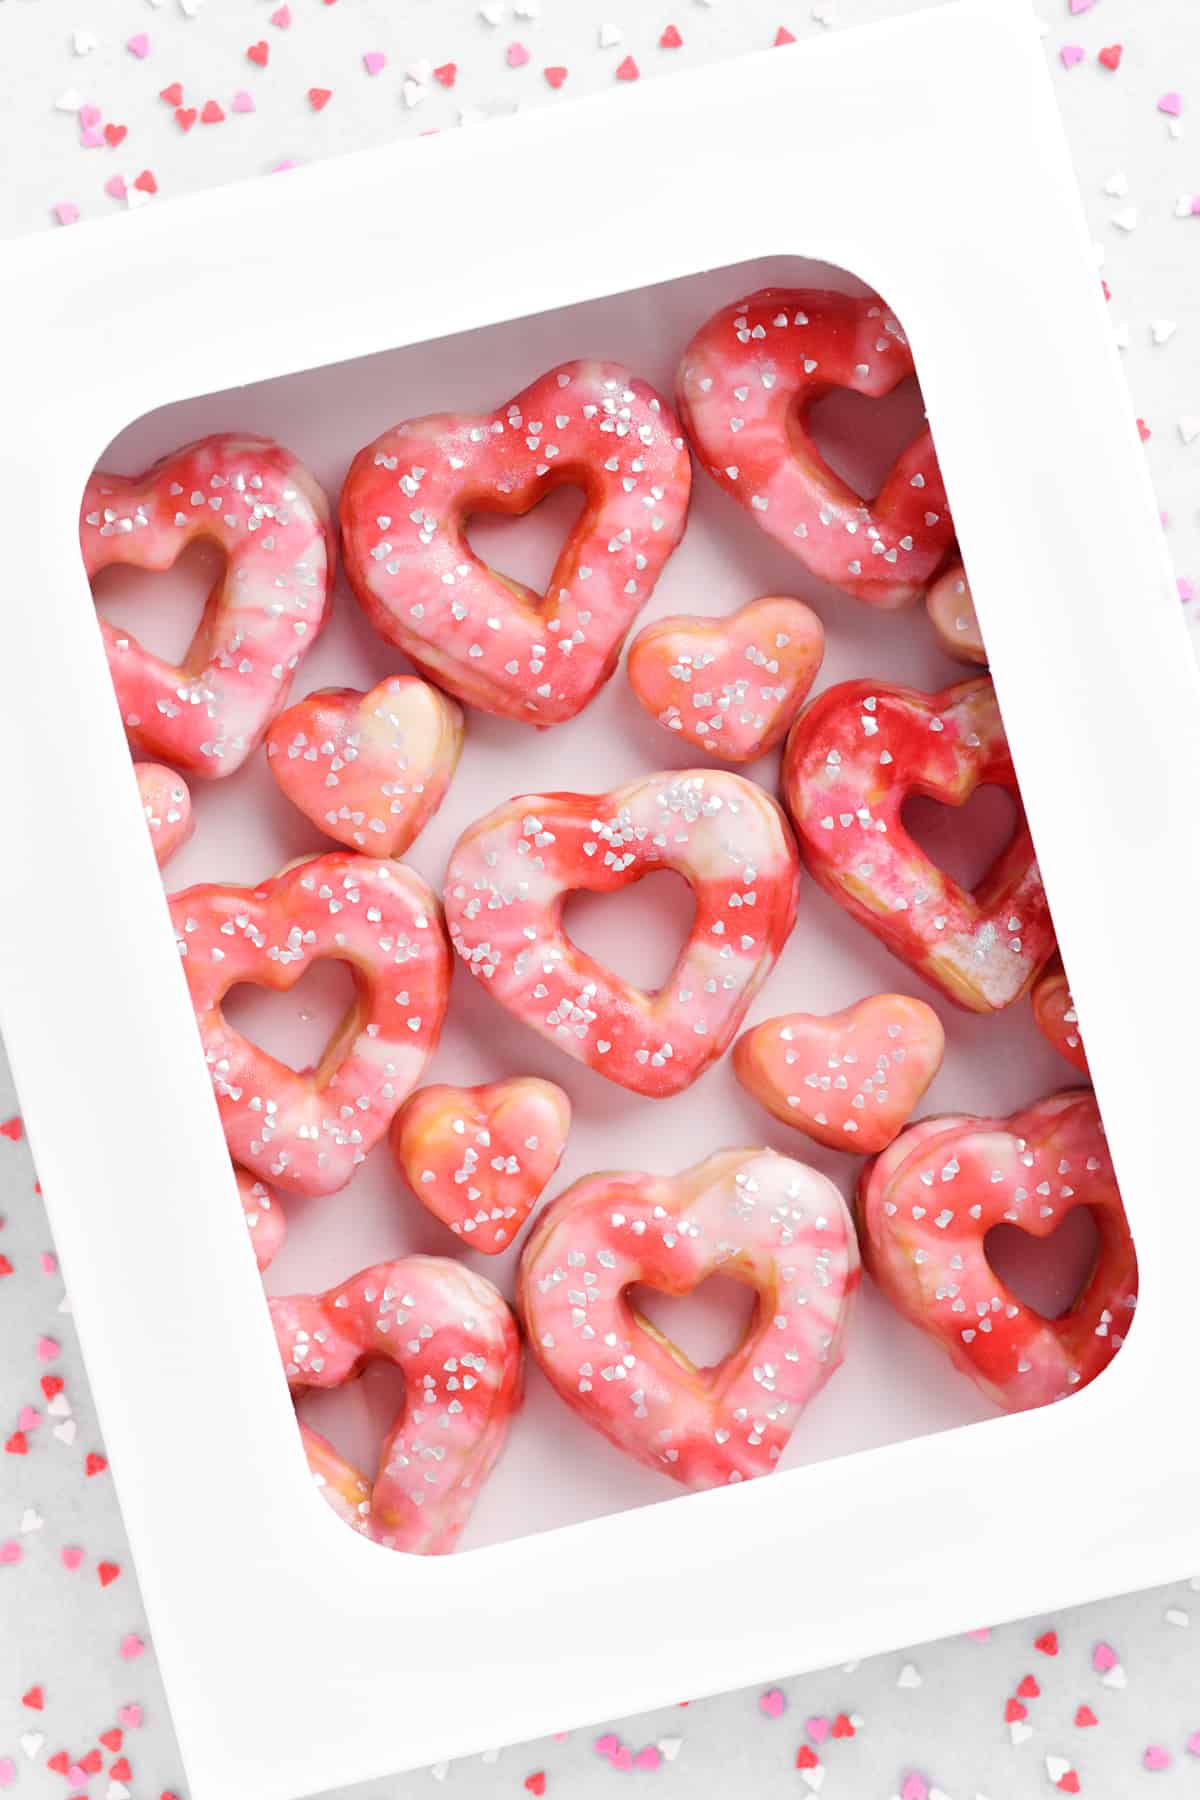 A white donut box with pink swirled valentines day donuts inside.